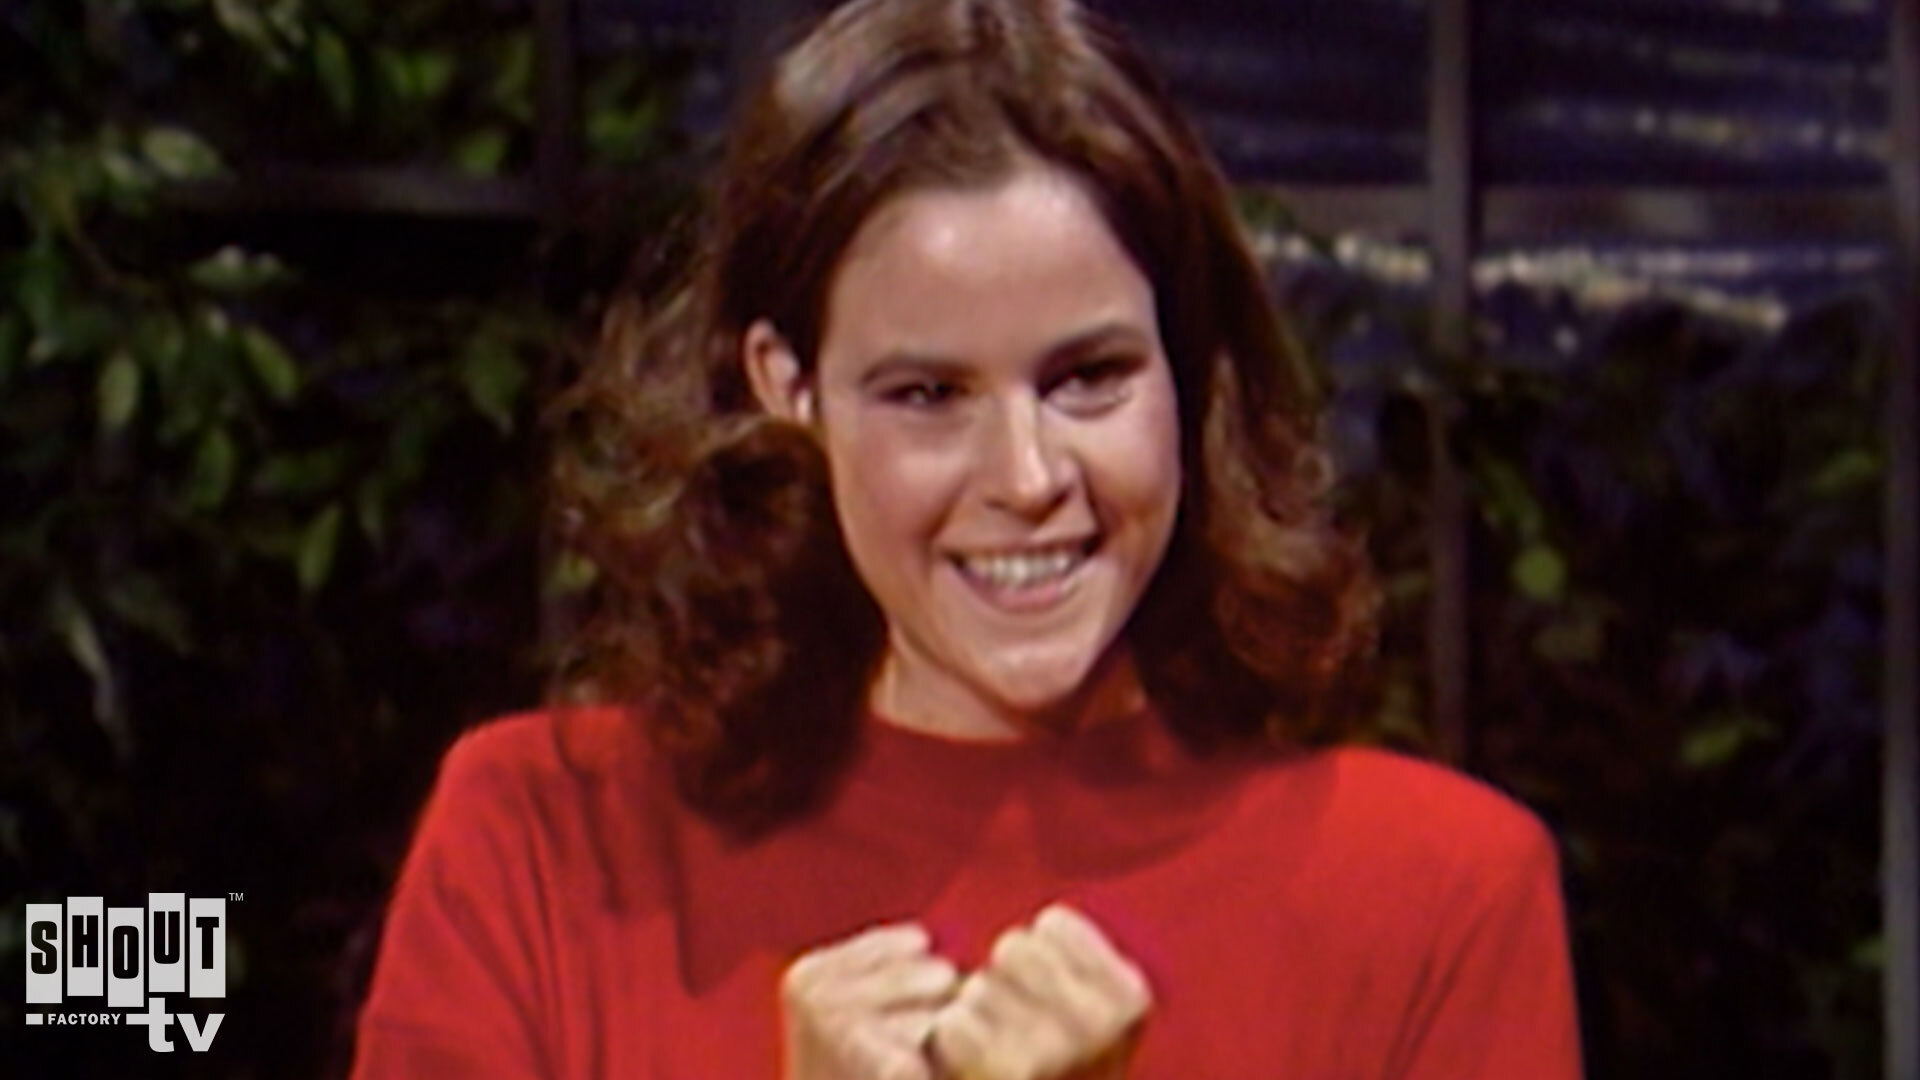 Of ally sheedy images 